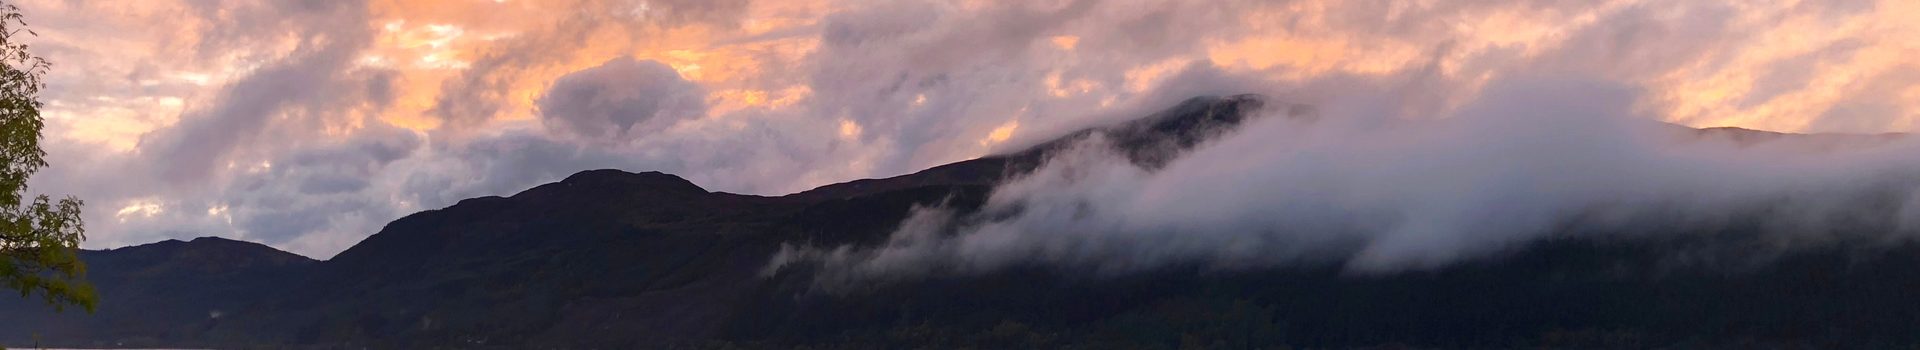 Cloudy sunset in the Scottish Highlands